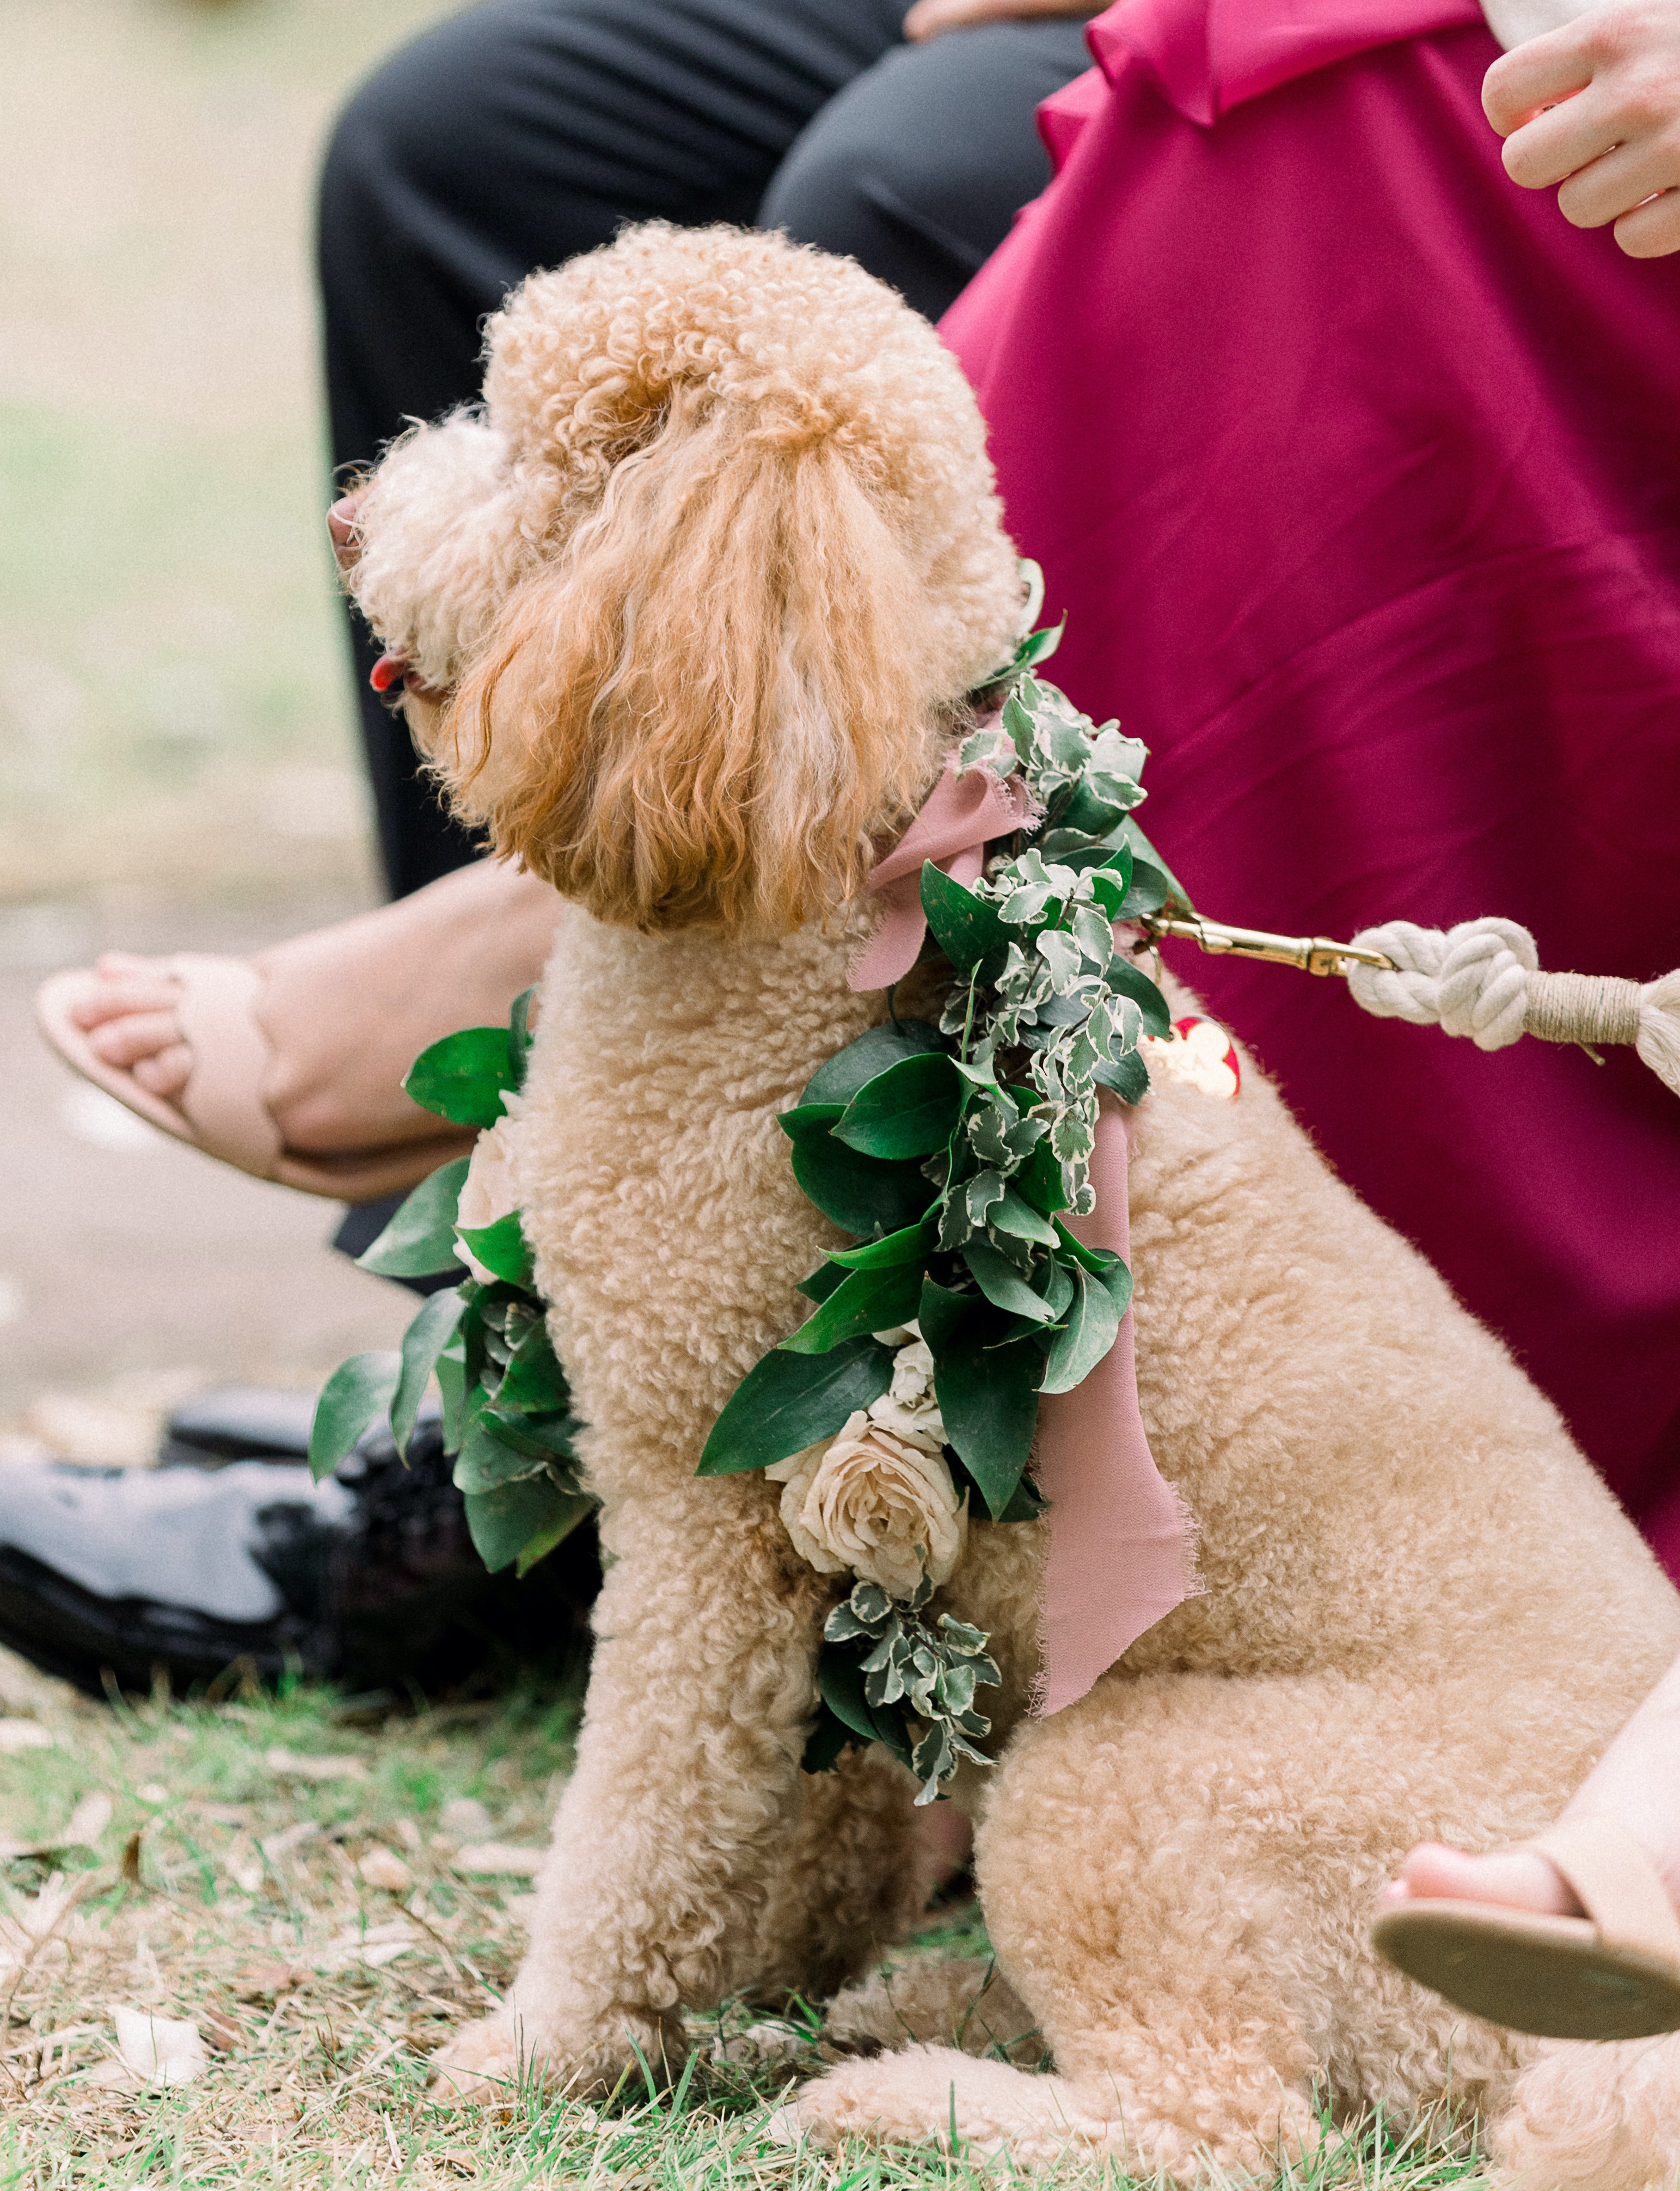 A miniature Goldendoodle wearing a greenery and floral garland at an outdoor wedding ceremony photographed by Anna Kay Photography.